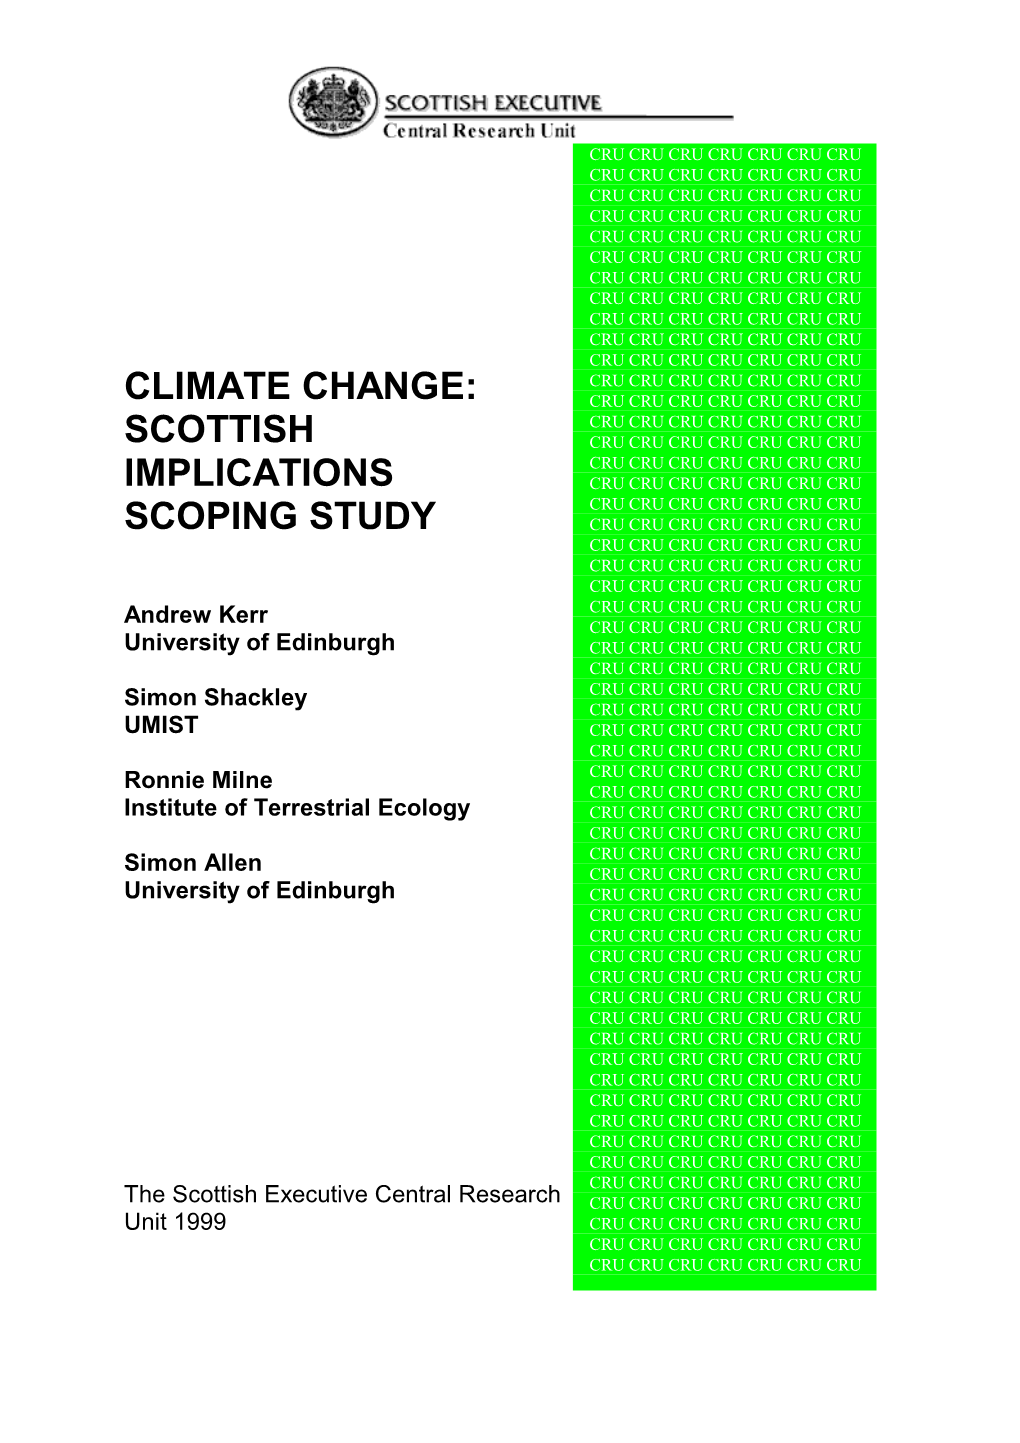 Climate Change: Scottish Implications Scoping